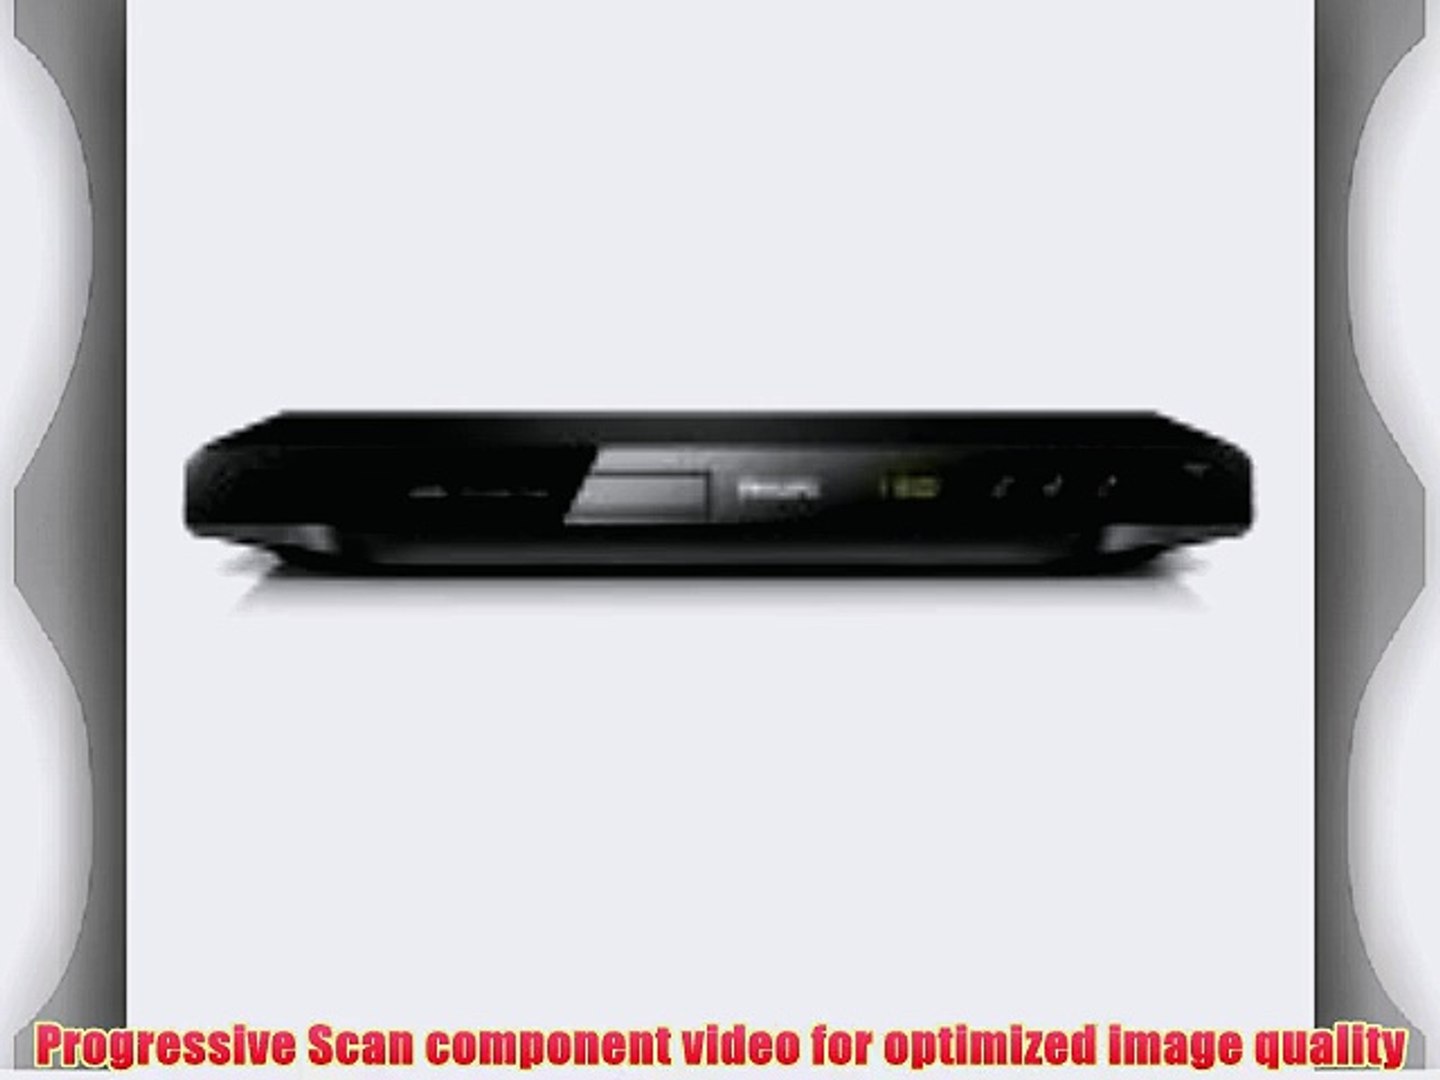 Philips DVP3680 DVD Player - Black (Discontinued by Manufacturer) - video  Dailymotion